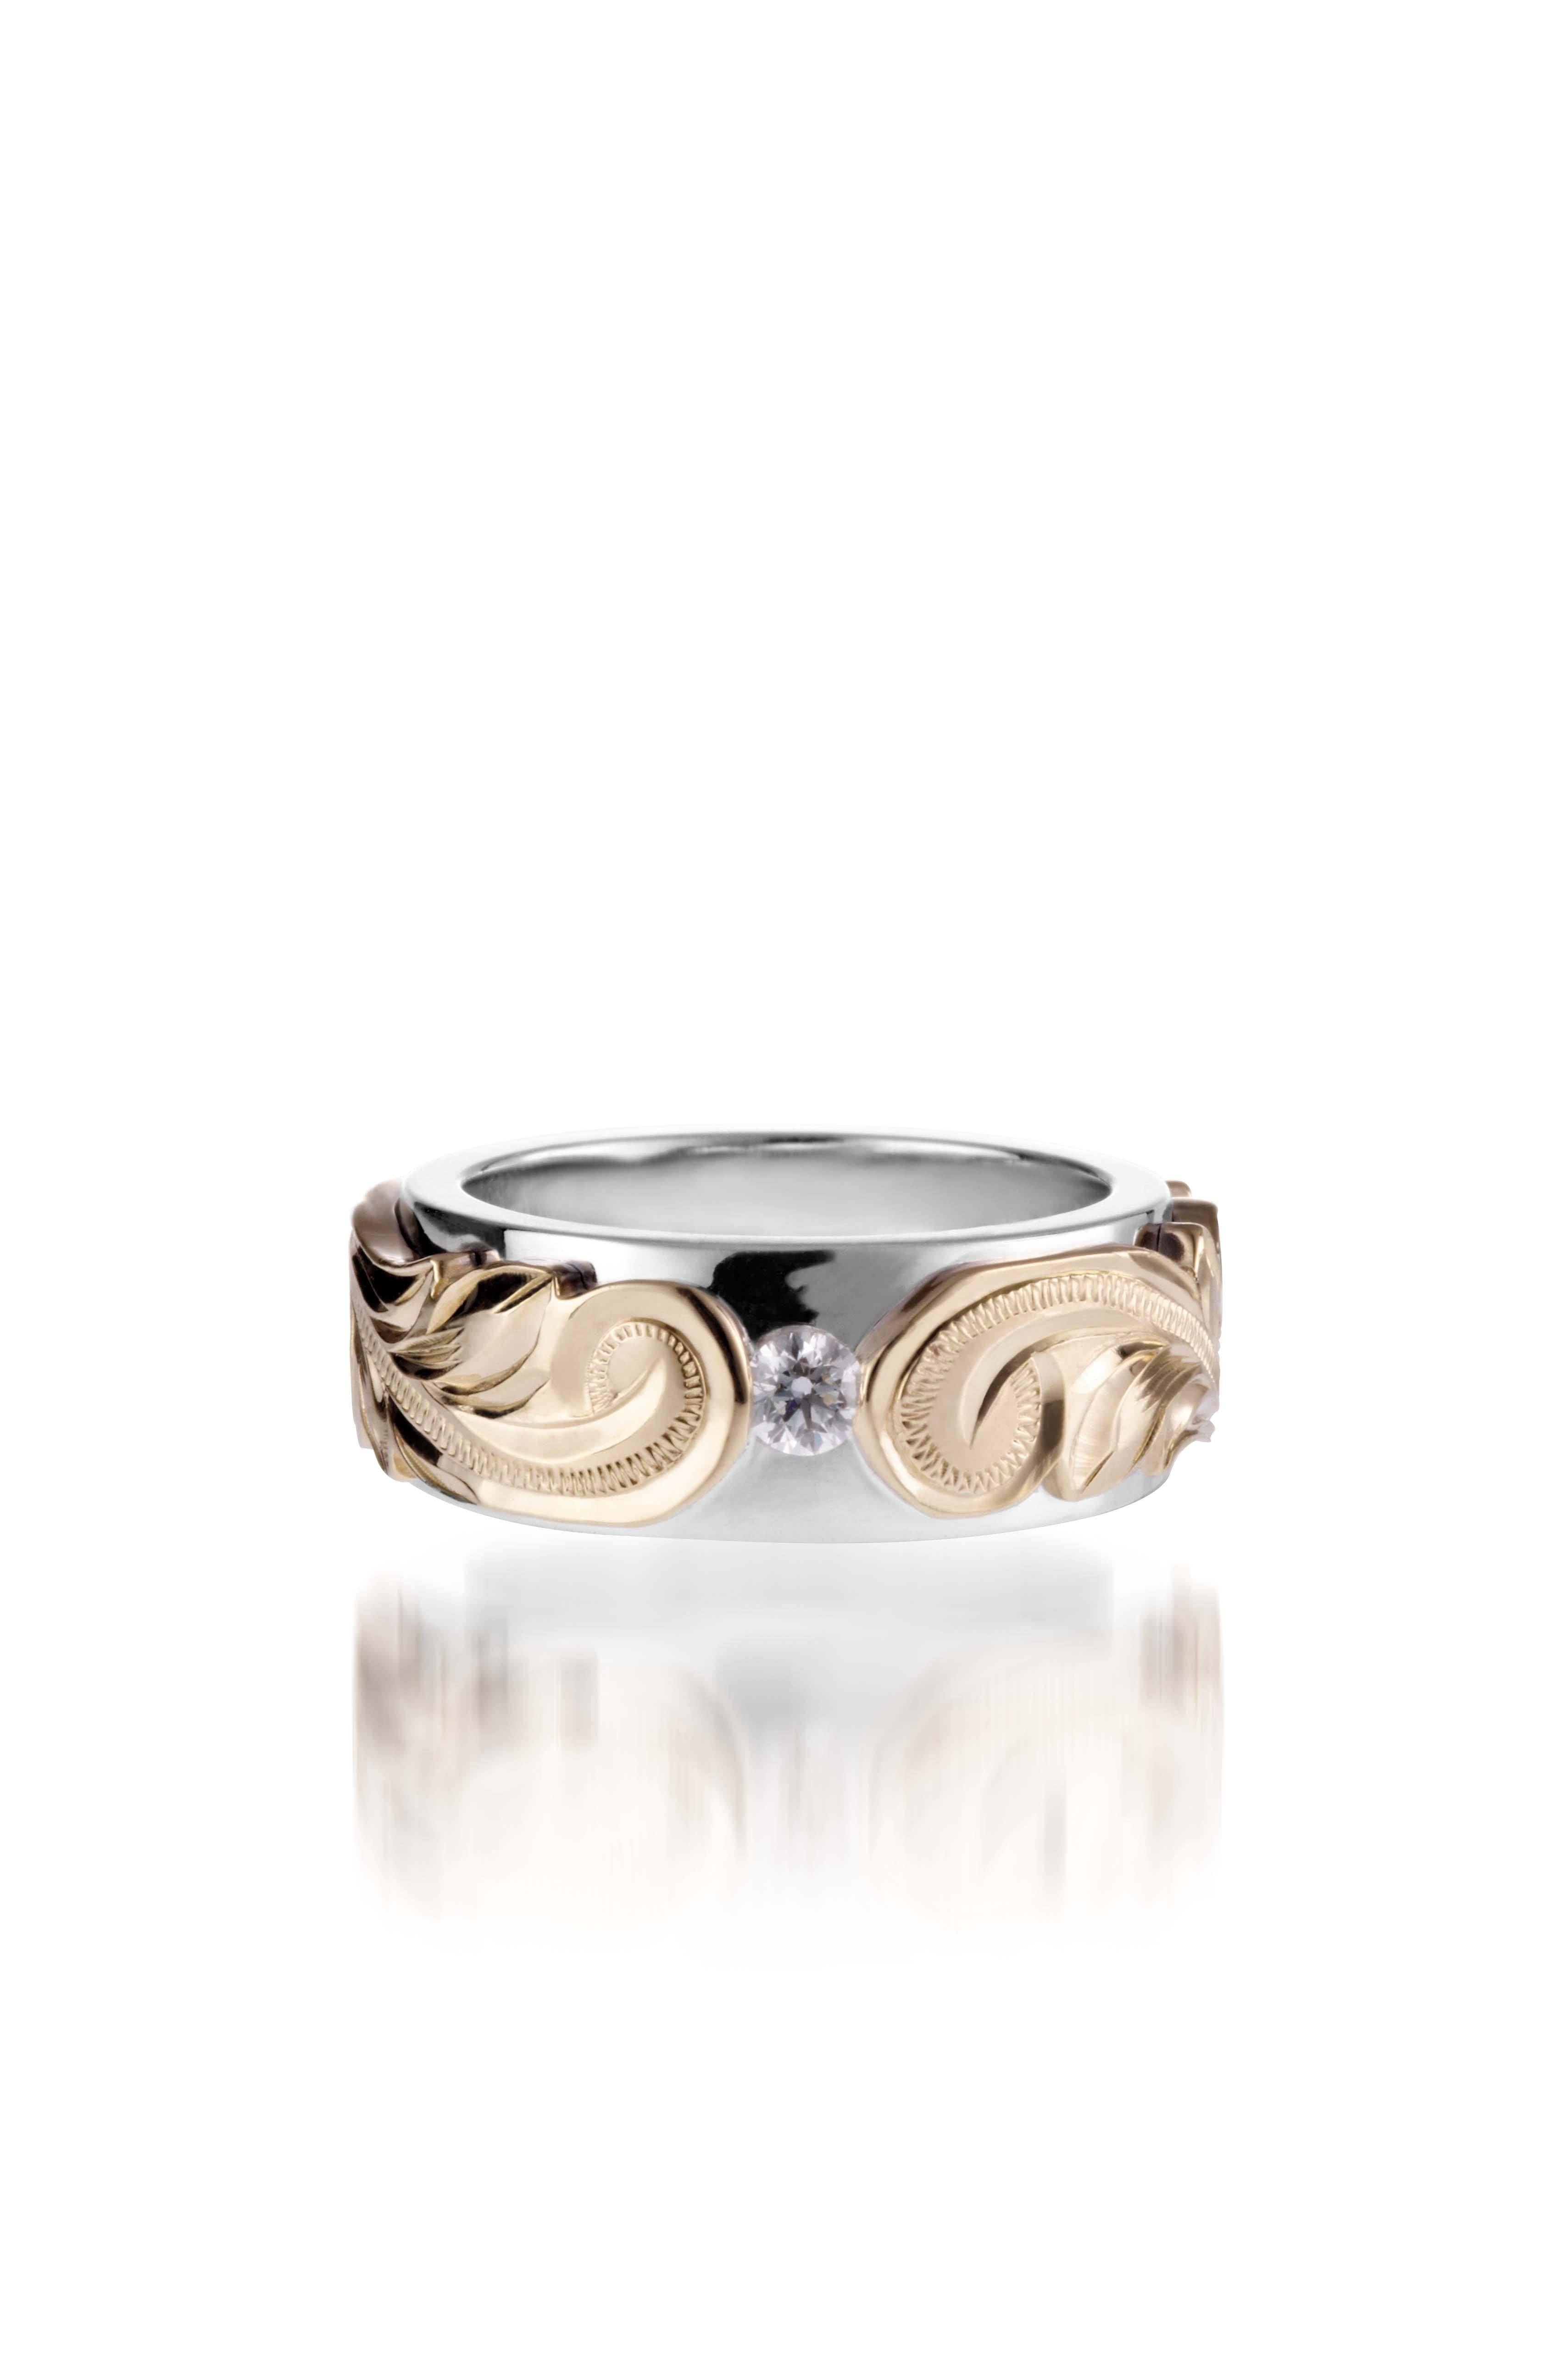 The picture shows a 14K white and yellow gold two-tone pinched 8 mm ring with hand-engravings and a diamond.